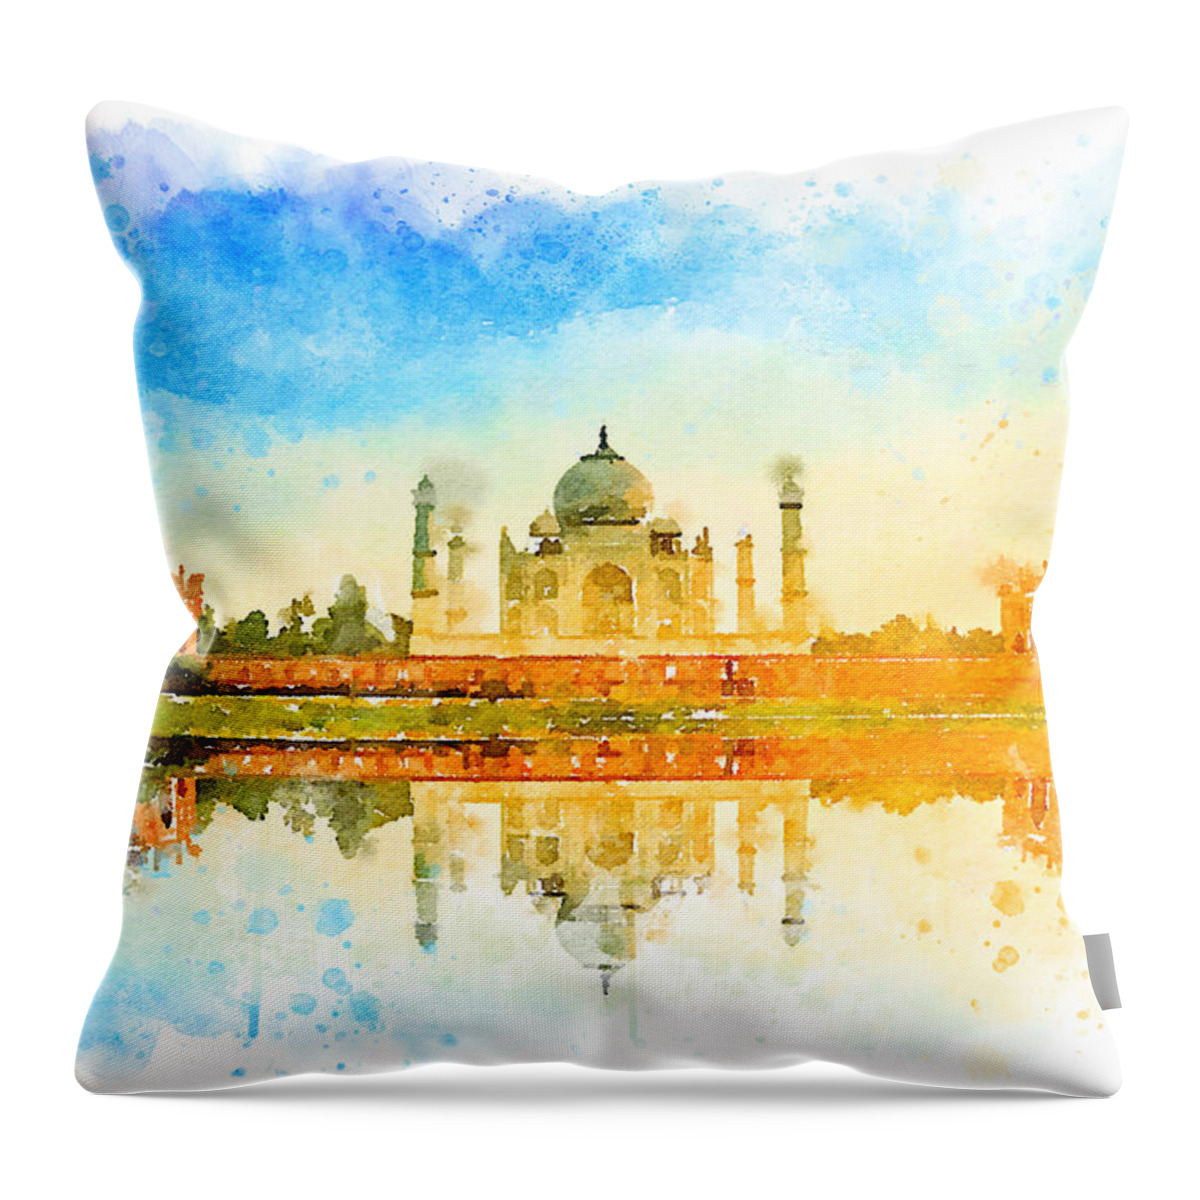 Watercolor Throw Pillow featuring the painting Watercolor Tajmahal, India by Vart by Vart Studio